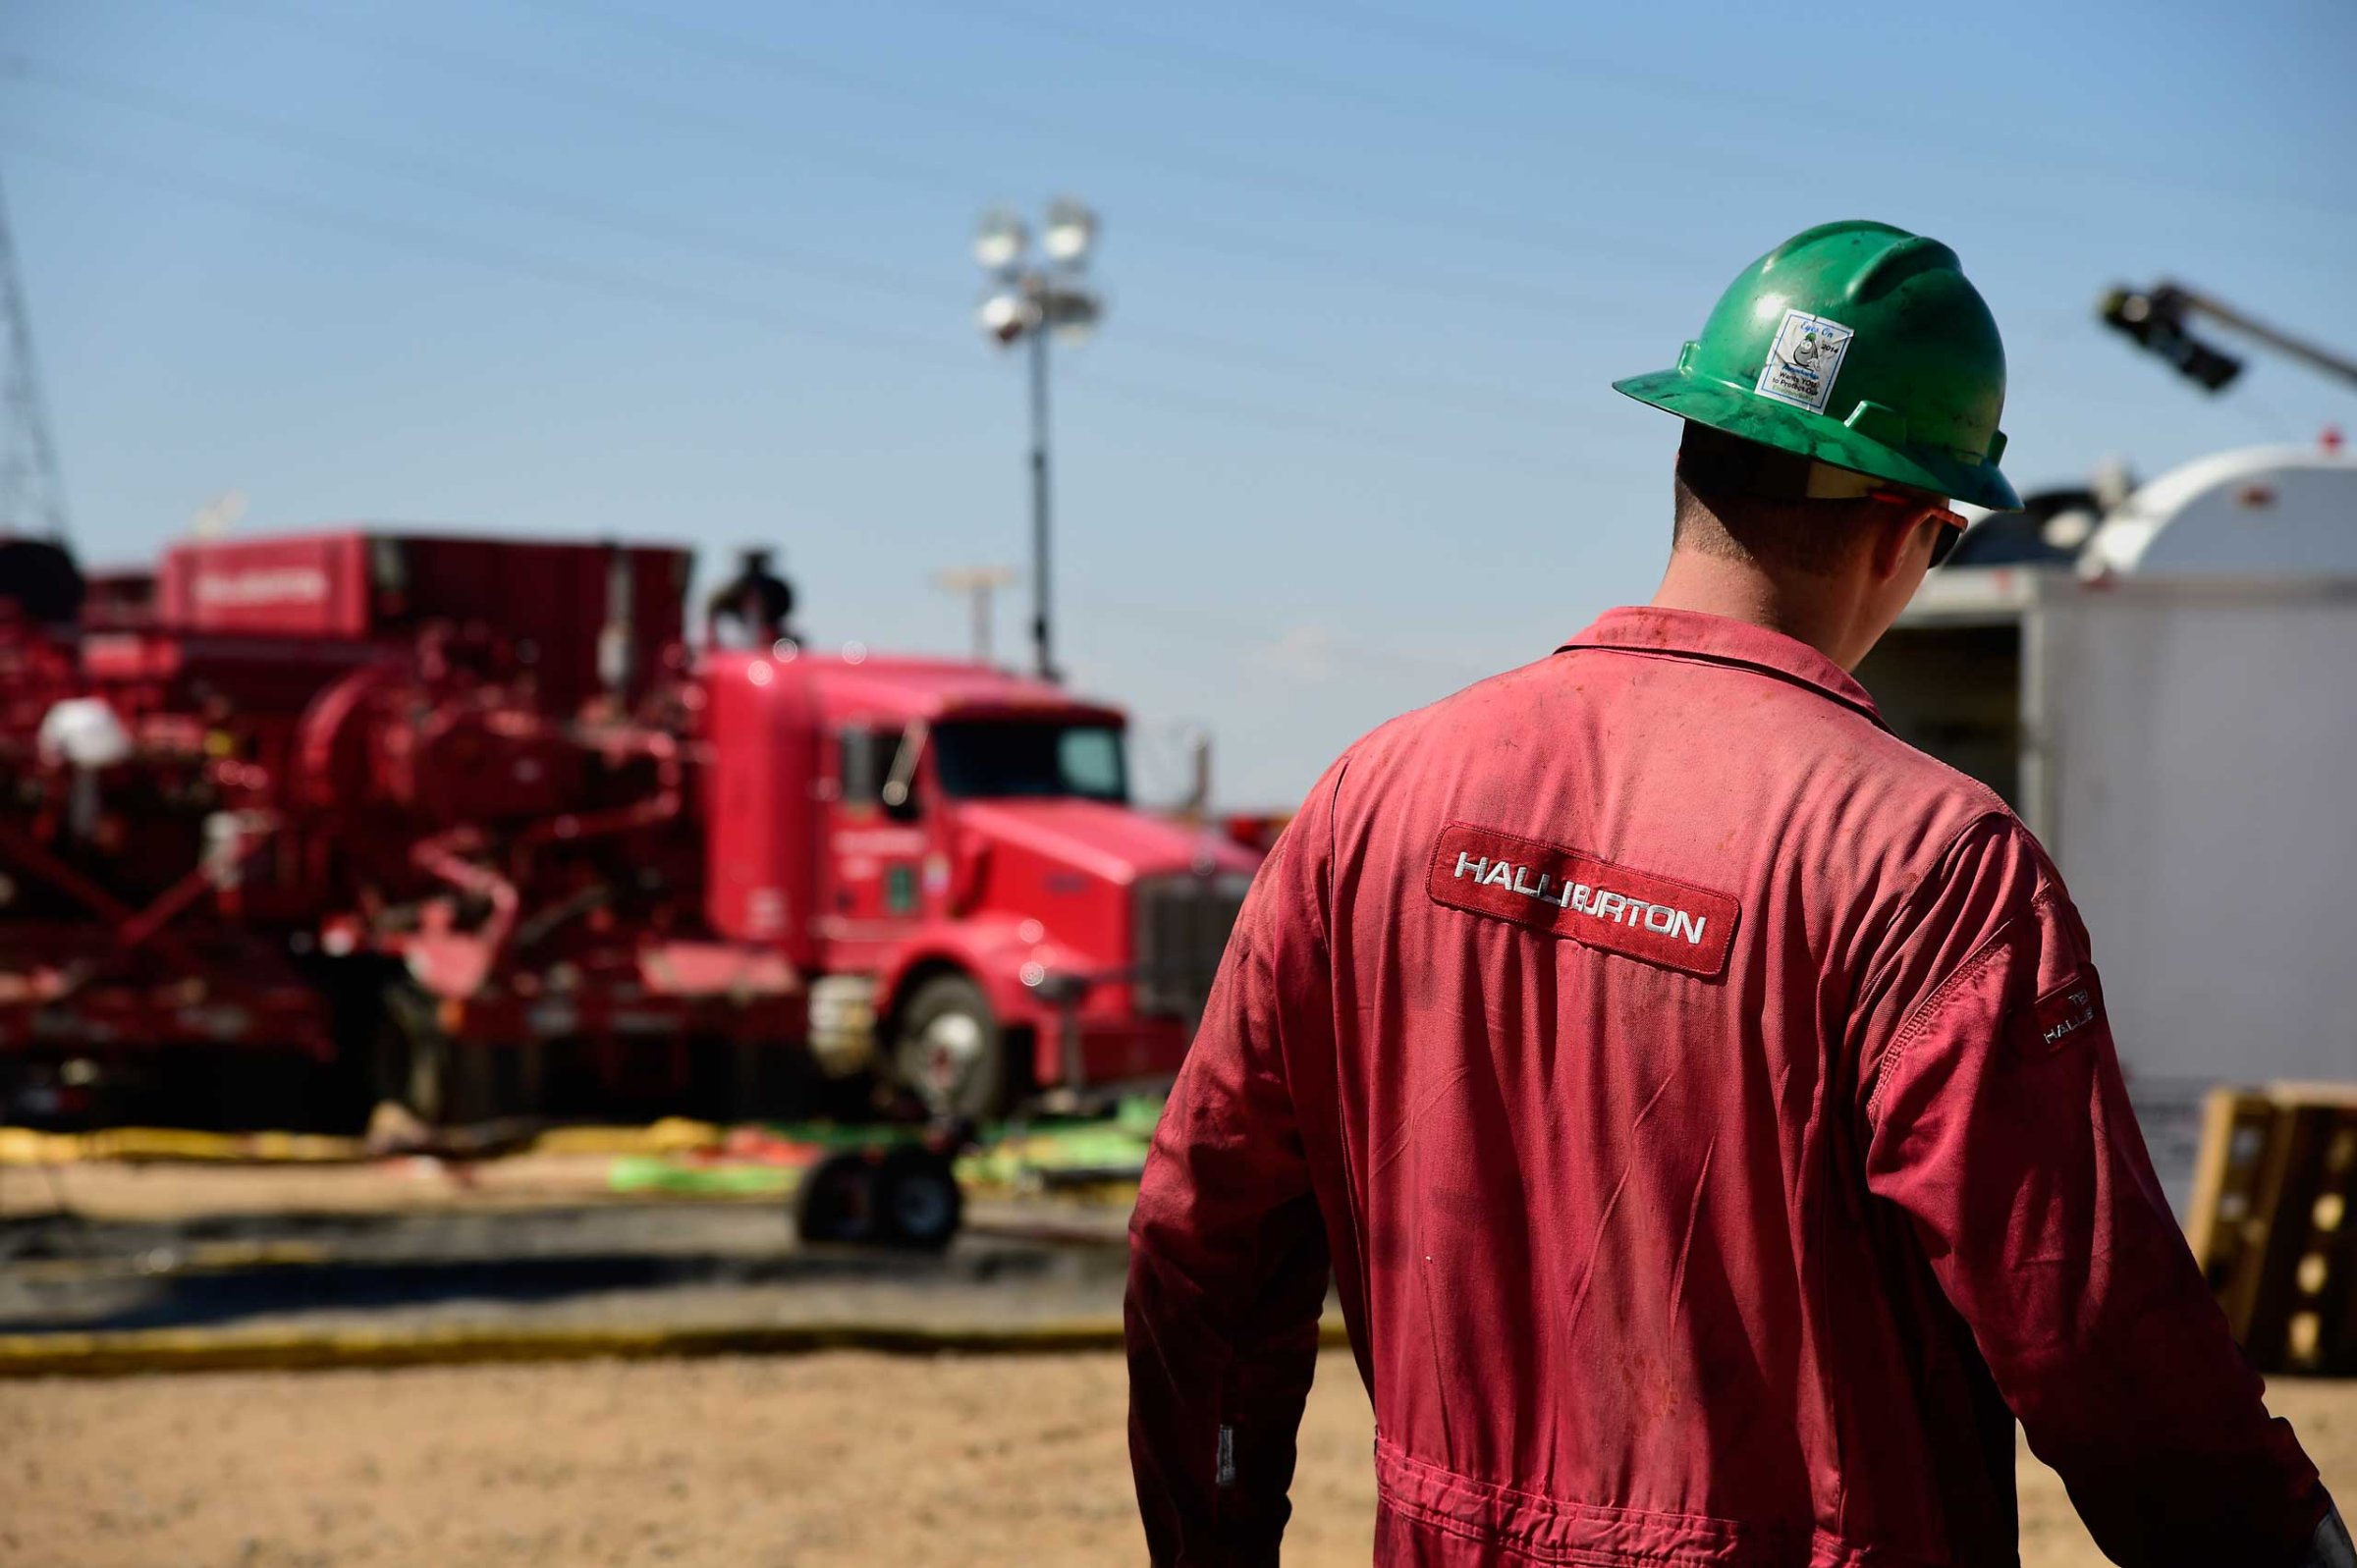 A Halliburton Co. worker walks through an Anadarko Petroleum Corp. hydraulic fracturing (fracking) site north of Dacono, Colo. on Aug. 12, 2014.